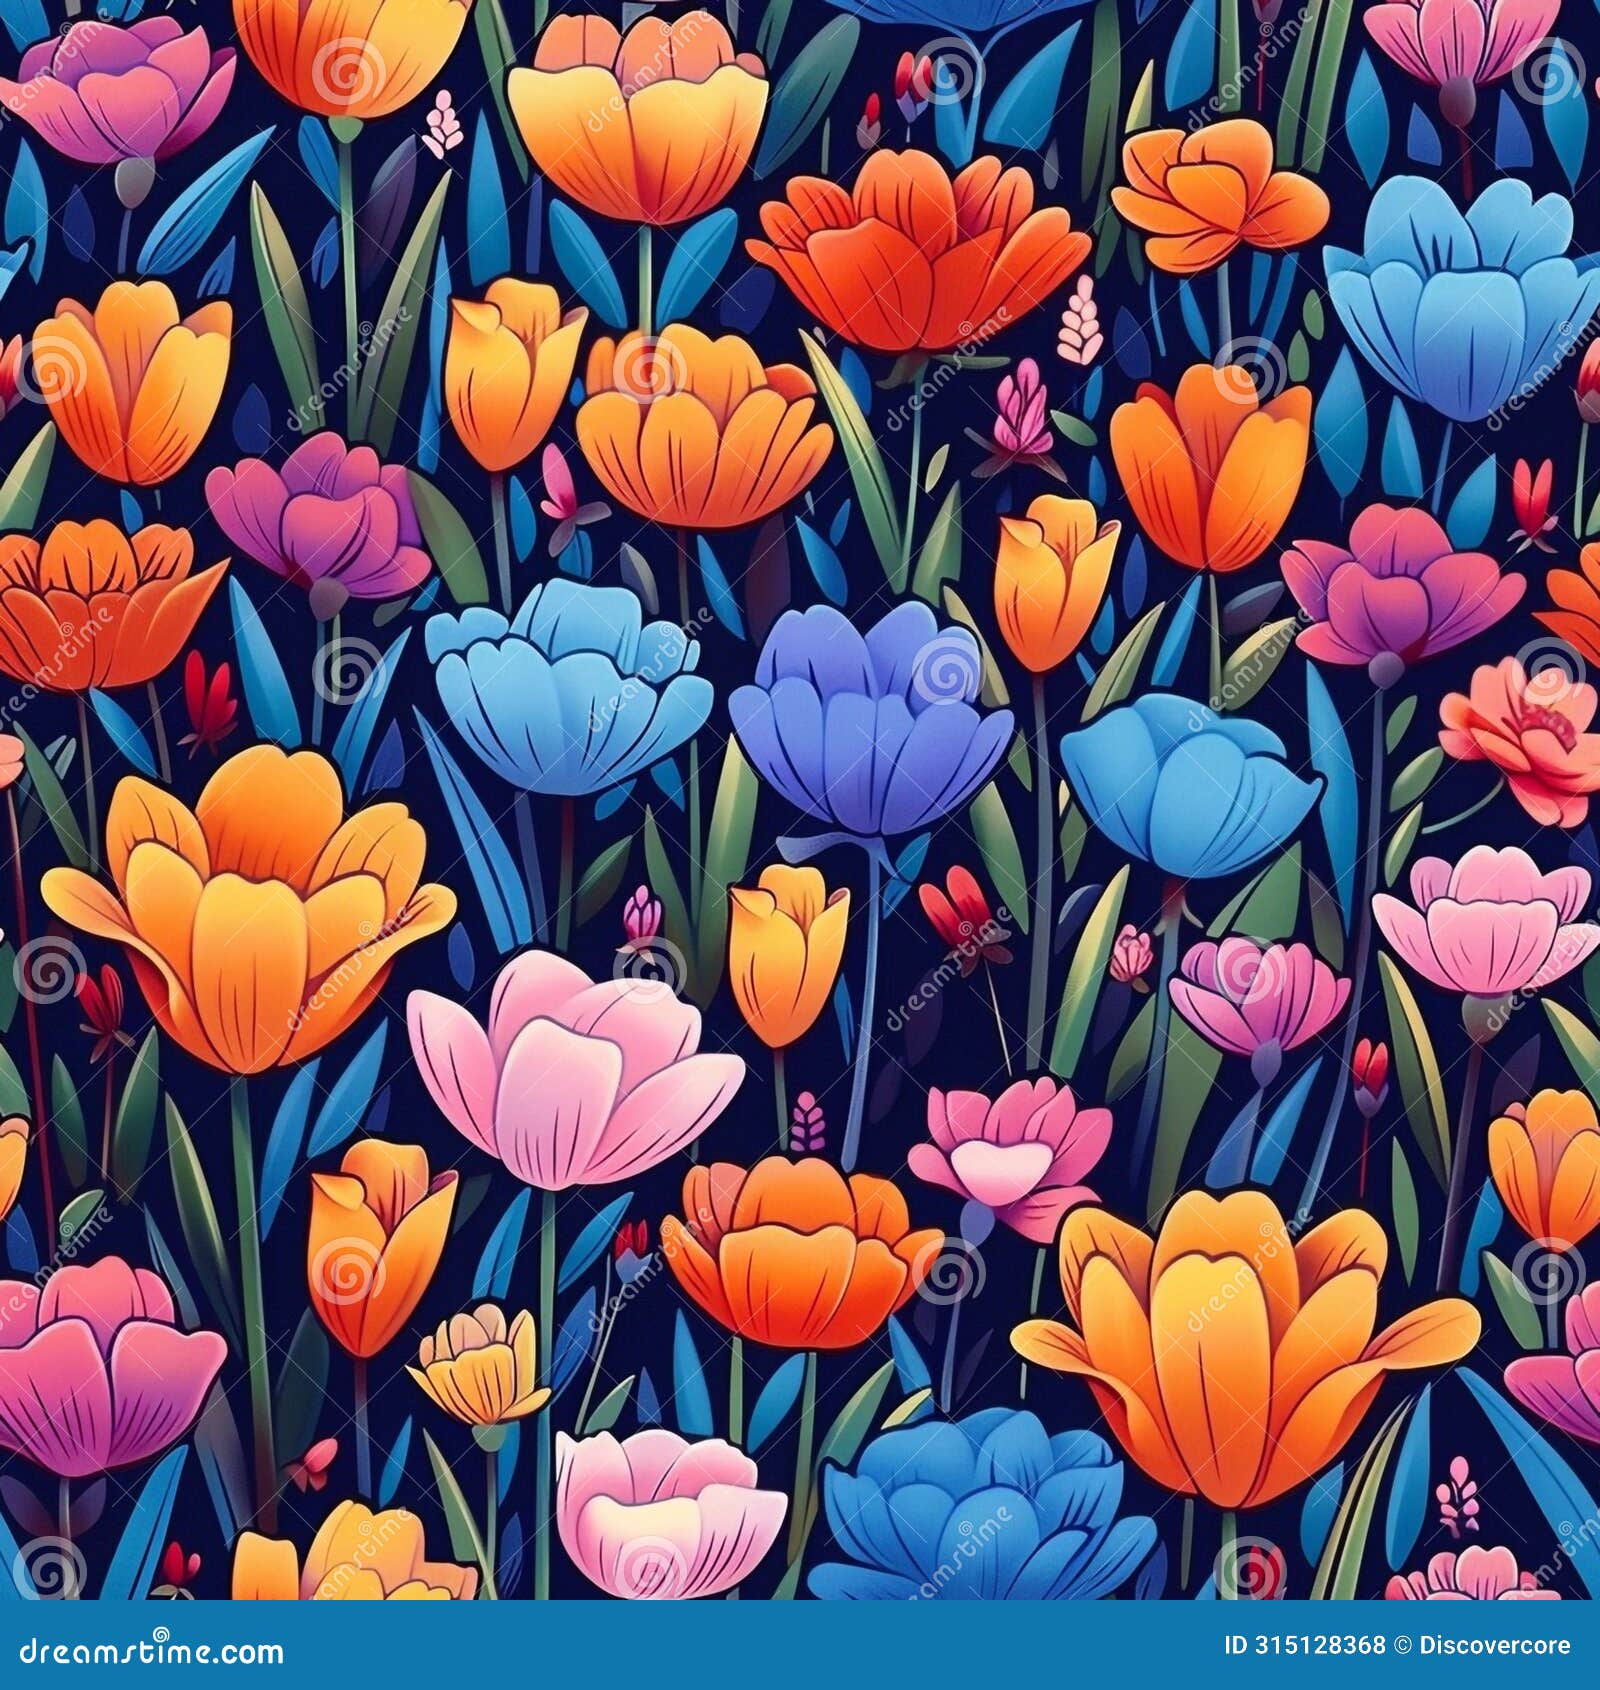 enchanted midnight garden: lush tulips in vibrant nighttime color pattern